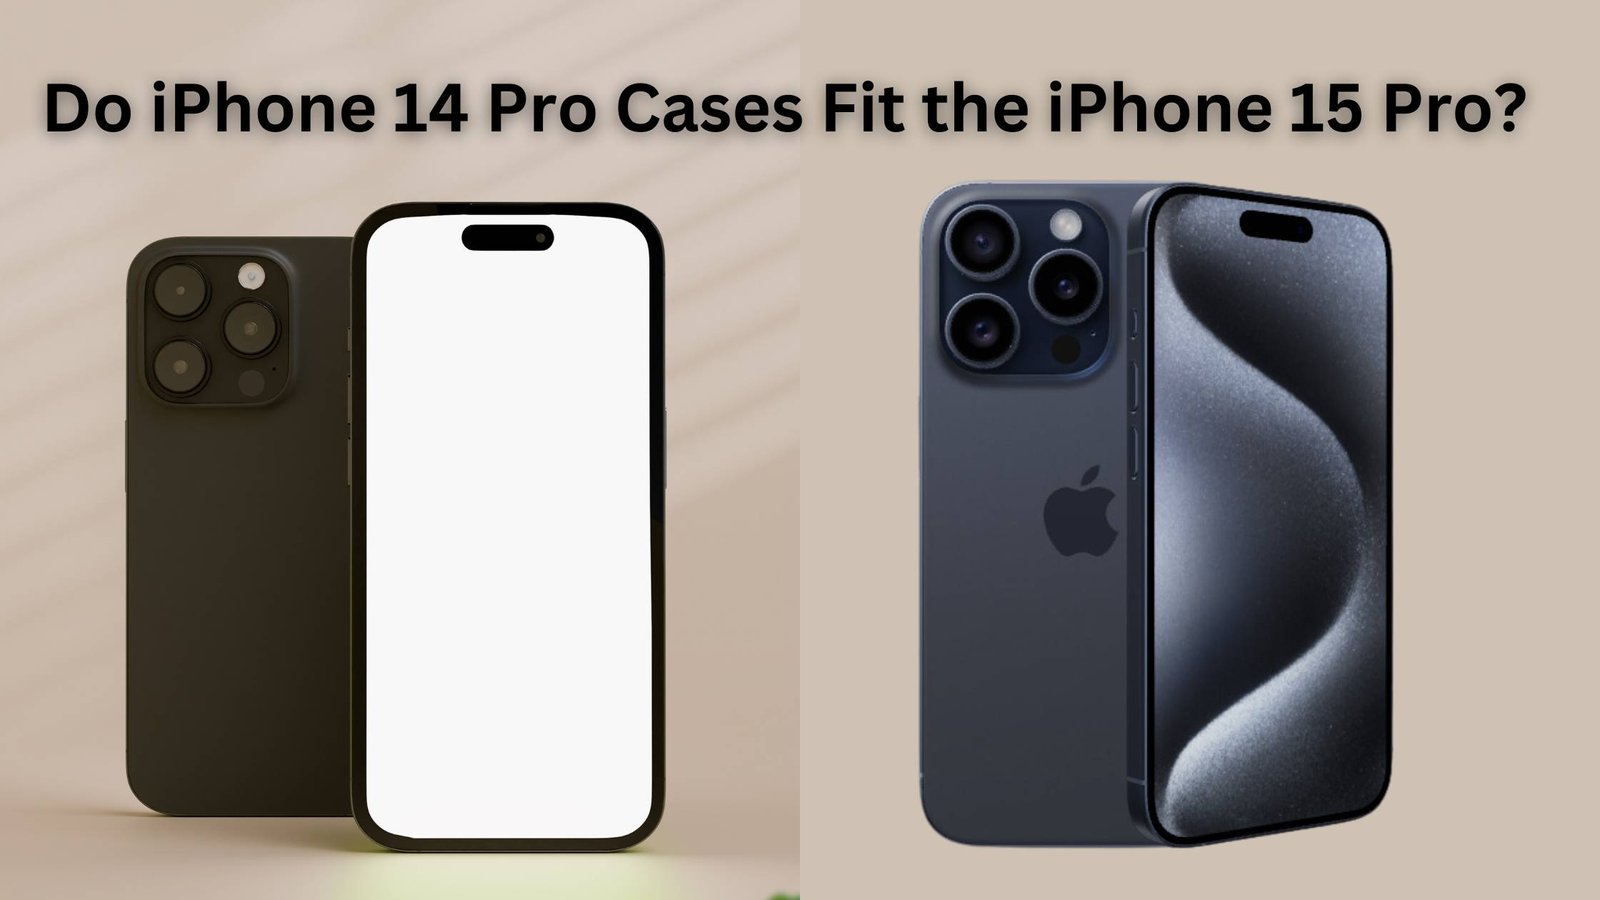 Do iPhone 14 Pro Cases Fit the iPhone 15 Pro